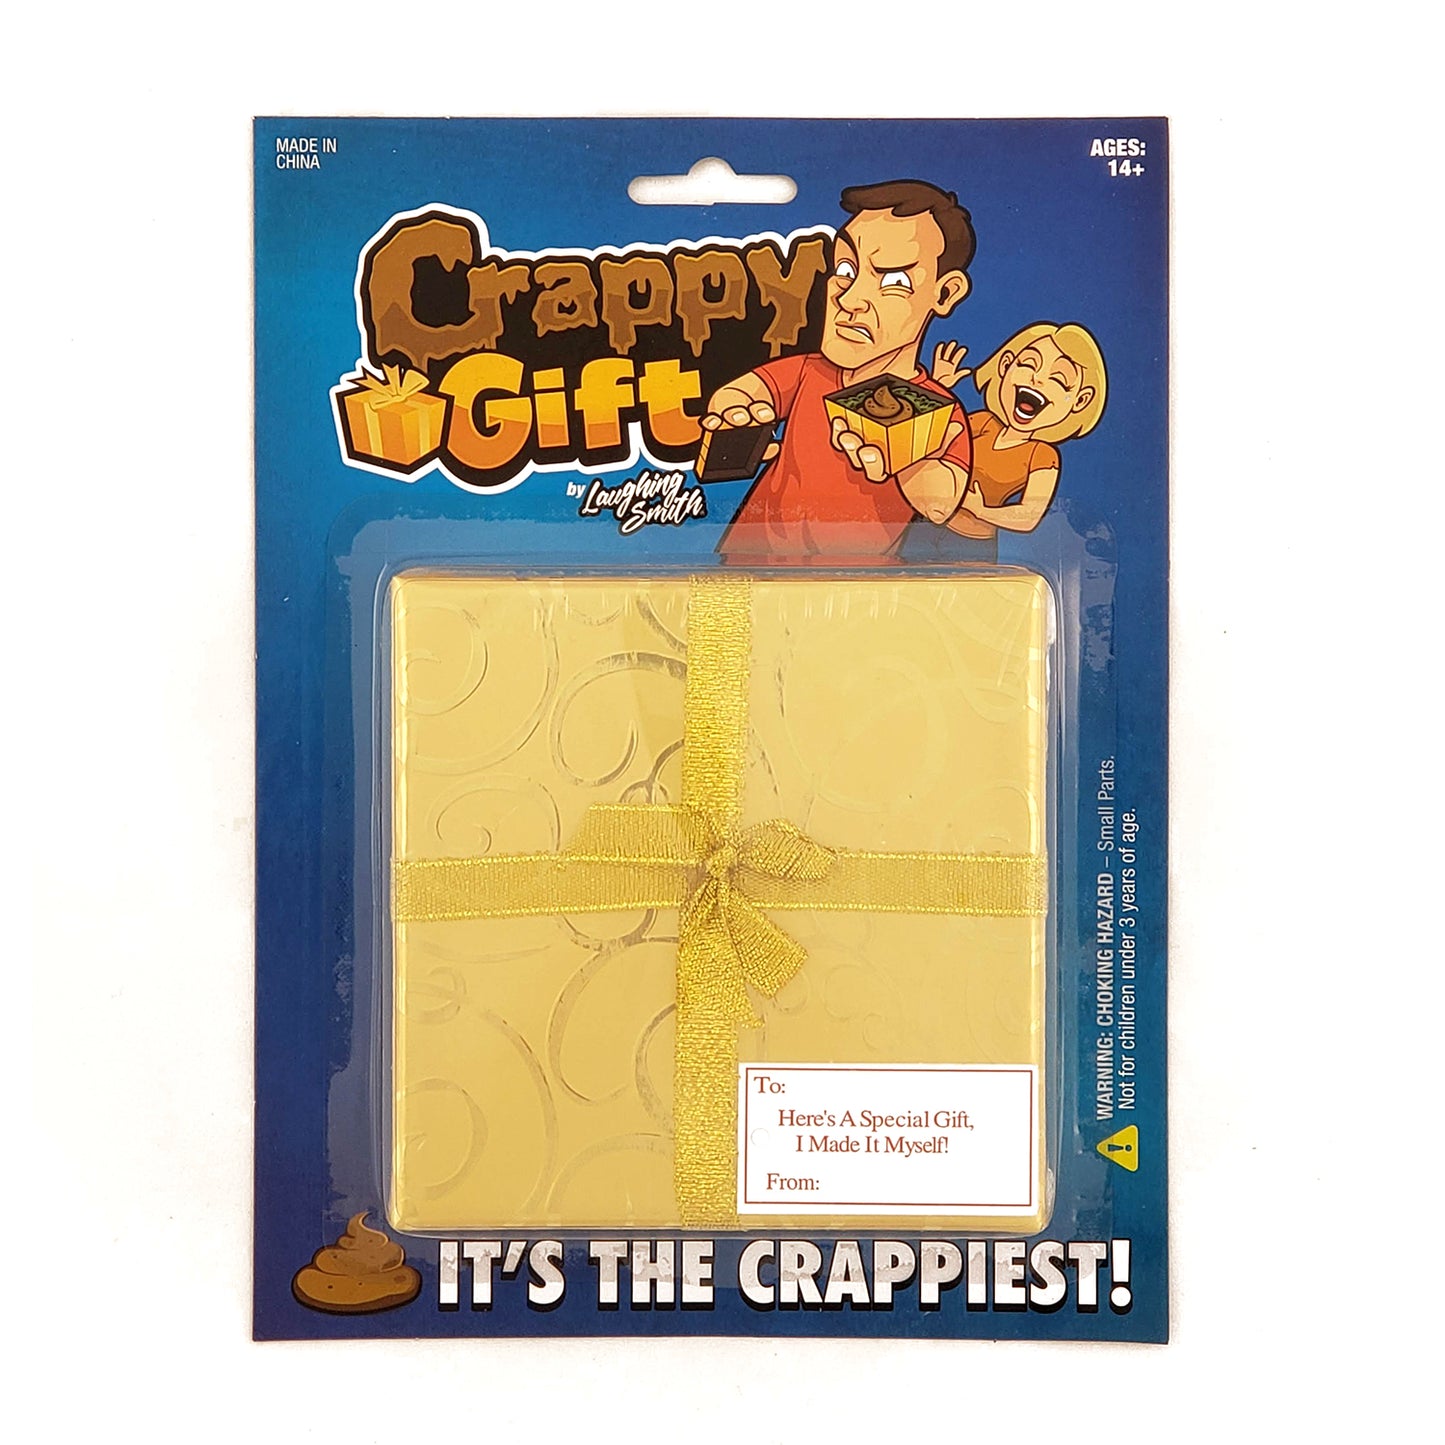 Crappy Gift - Fake Poo Toy Prank in a Gift Box - Fun Gag Poop Gift for Kids and Adults